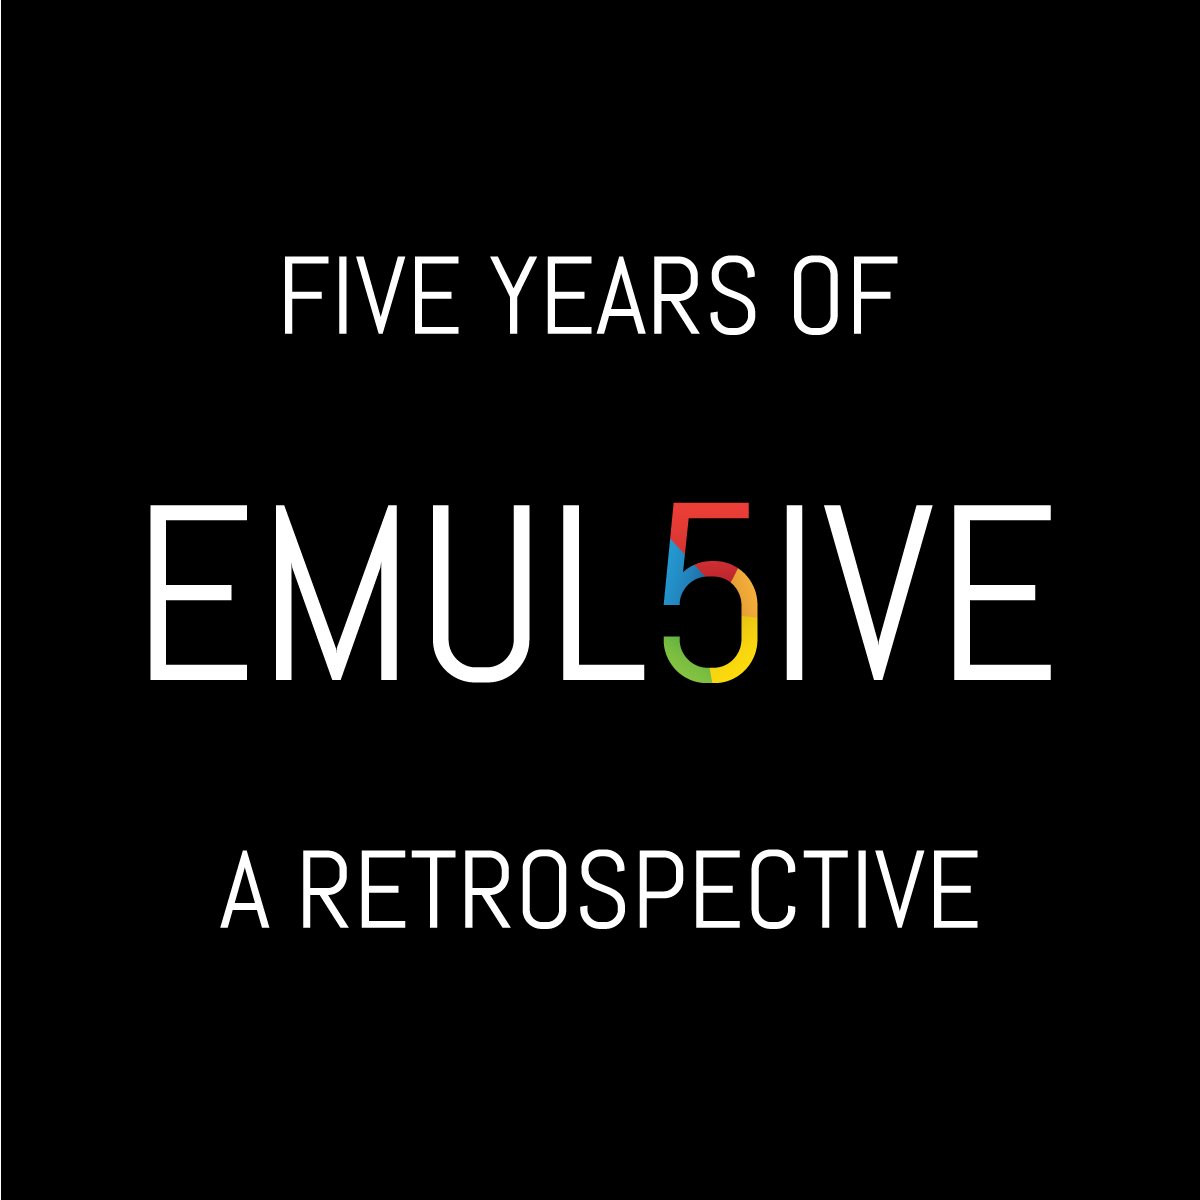 Five years of EMULSIVE – a retrospective